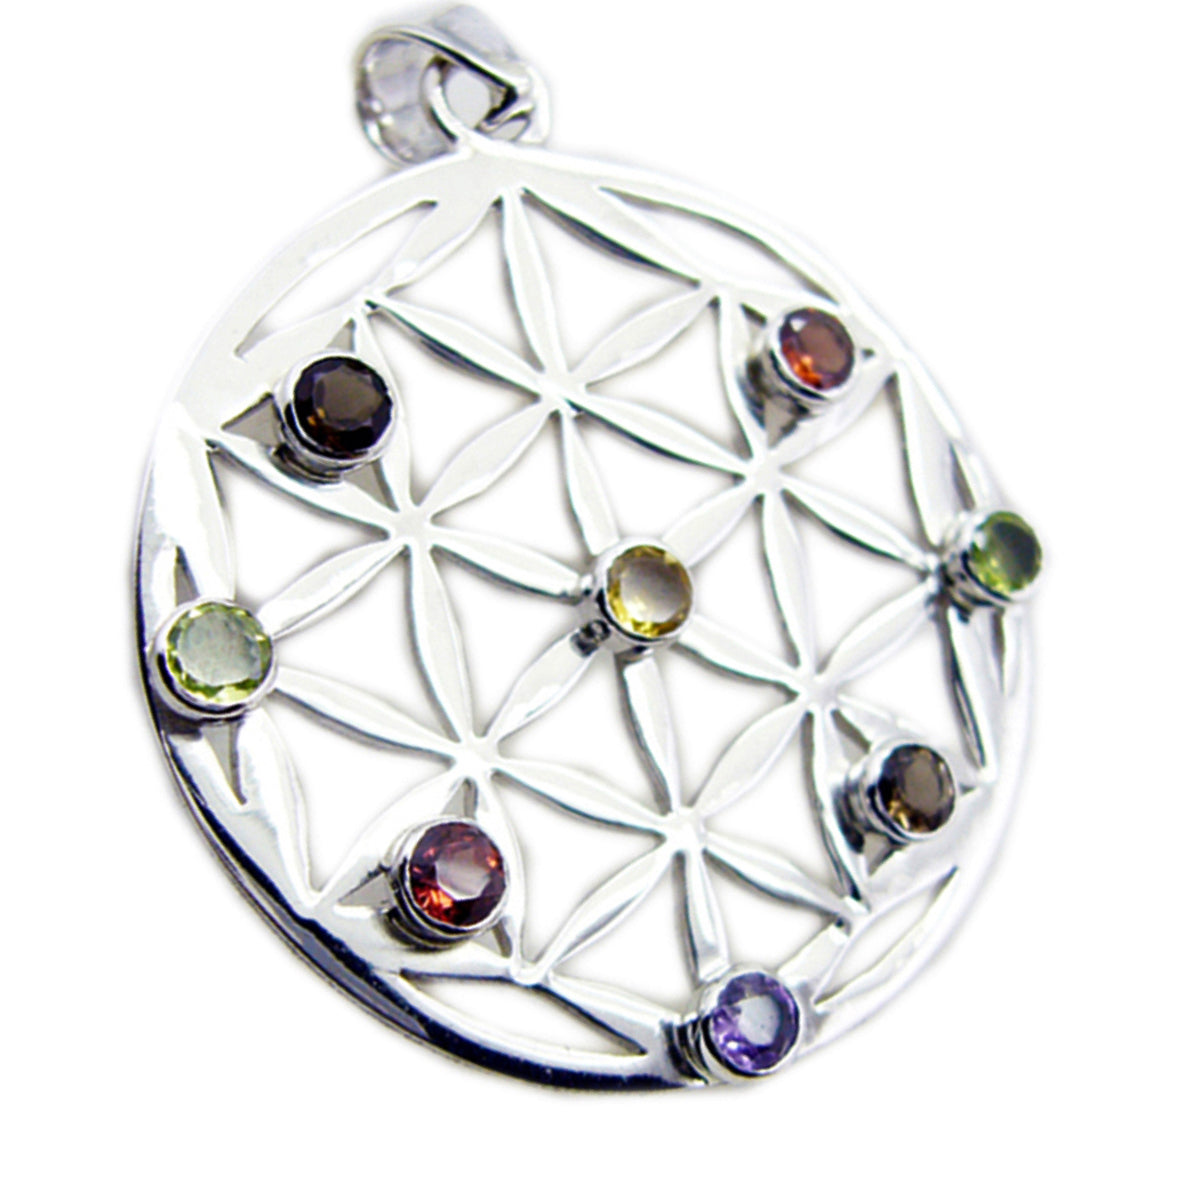 Riyo Fit Gemstone Round Faceted Multi Color Multi Stone Sterling Silver Pendant Gift For Friend